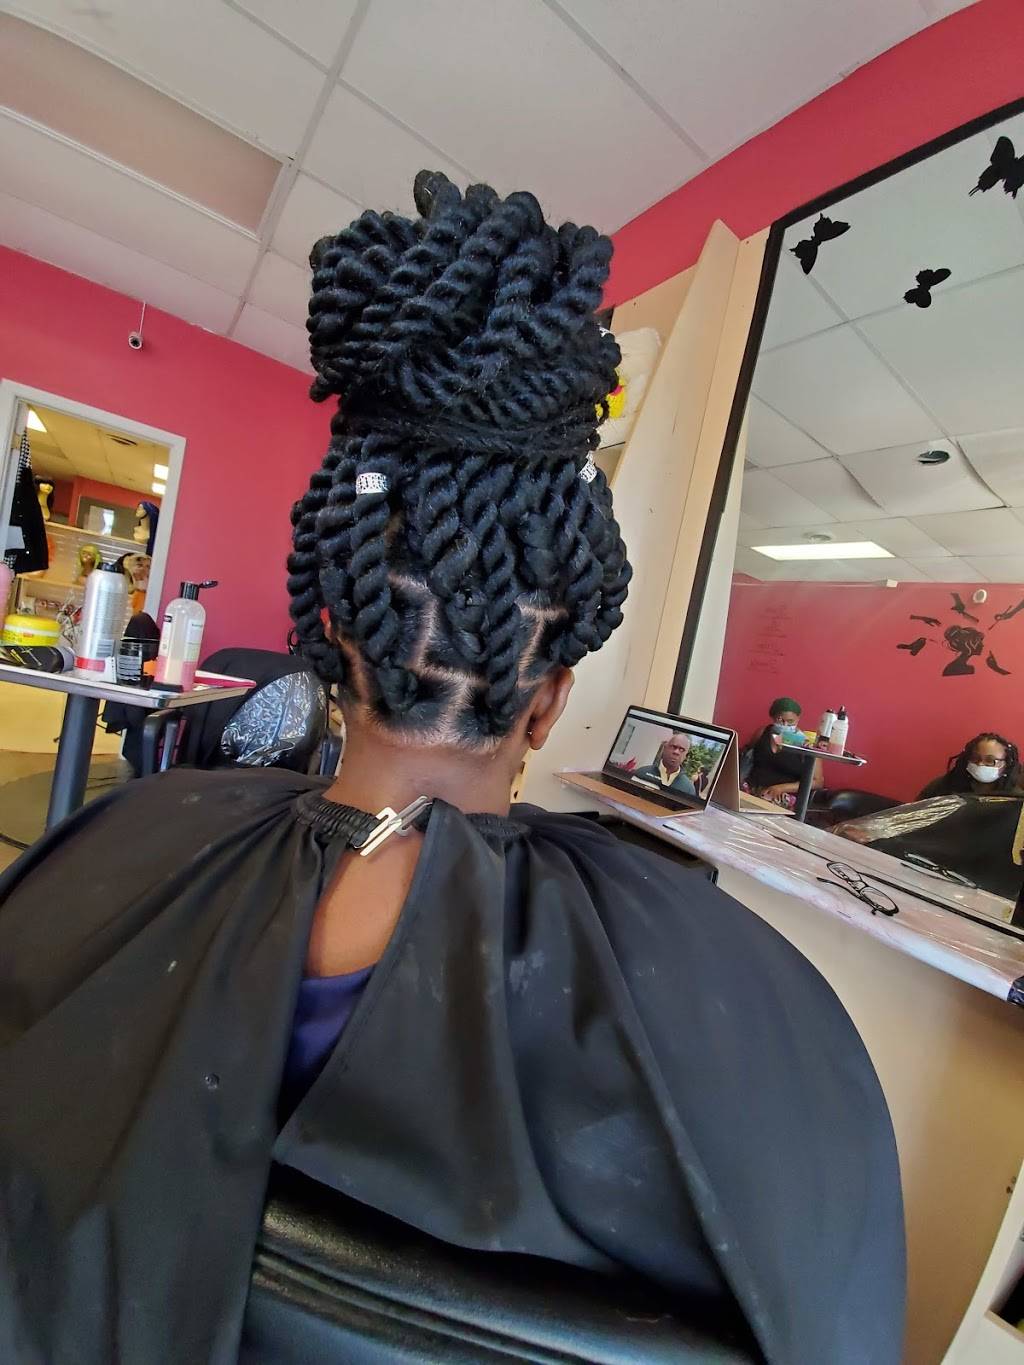 Lab african hair braiding - hair care  | Photo 9 of 9 | Address: 7635 Dixie Hwy, Florence, KY 41042, USA | Phone: (859) 462-5408